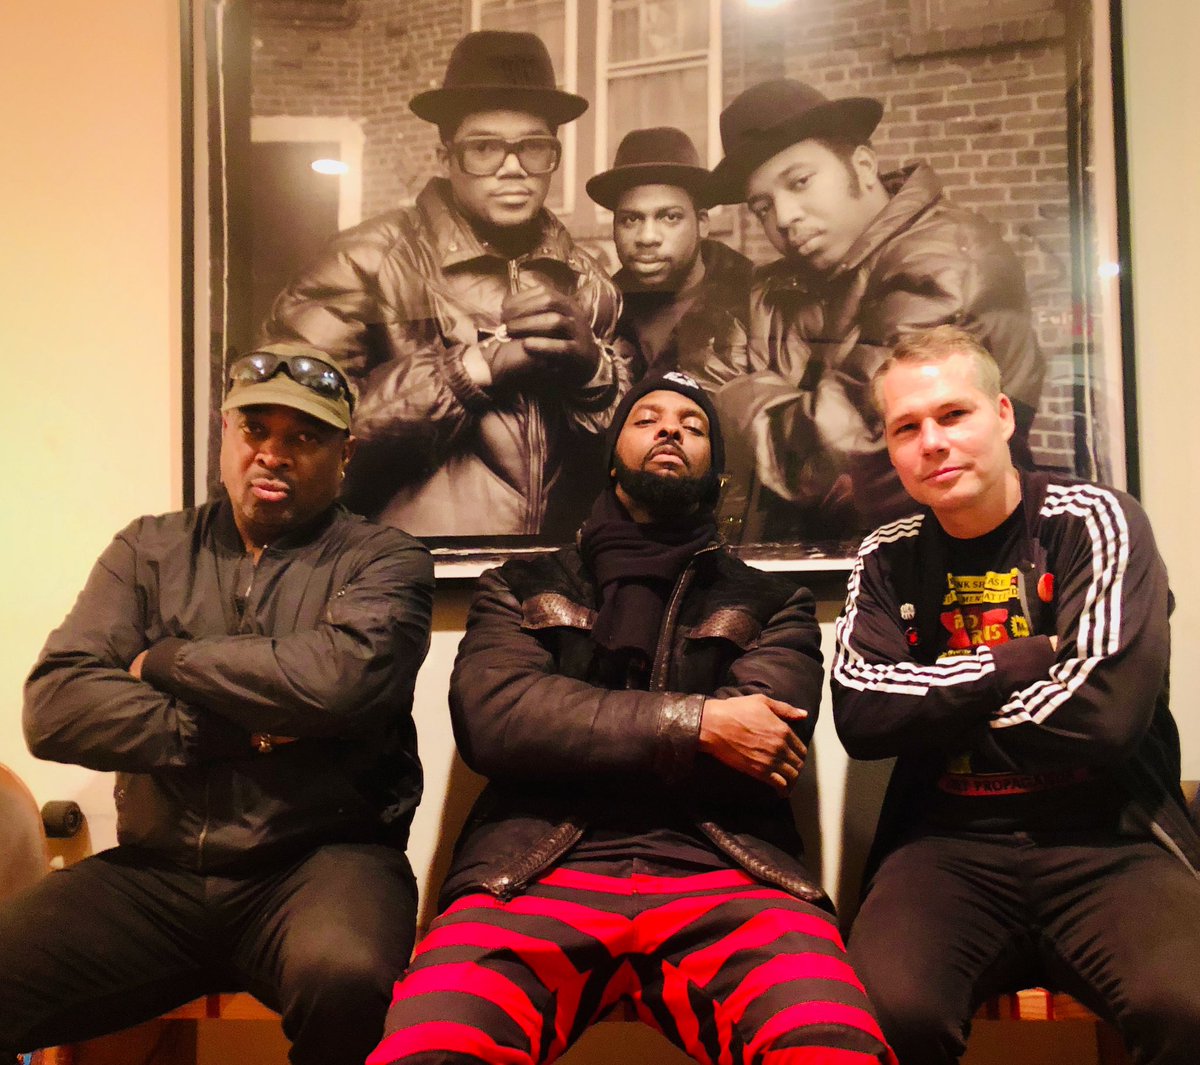 “And That’s The Way It Is”..HUH! @DjLORDofficial @MrChuckD @OBEYGIANT @PublicEnemyFTP #ChuckD #DjLORD #HipHop #Legends #LosAngeles #RunDMC #ShepardFairey